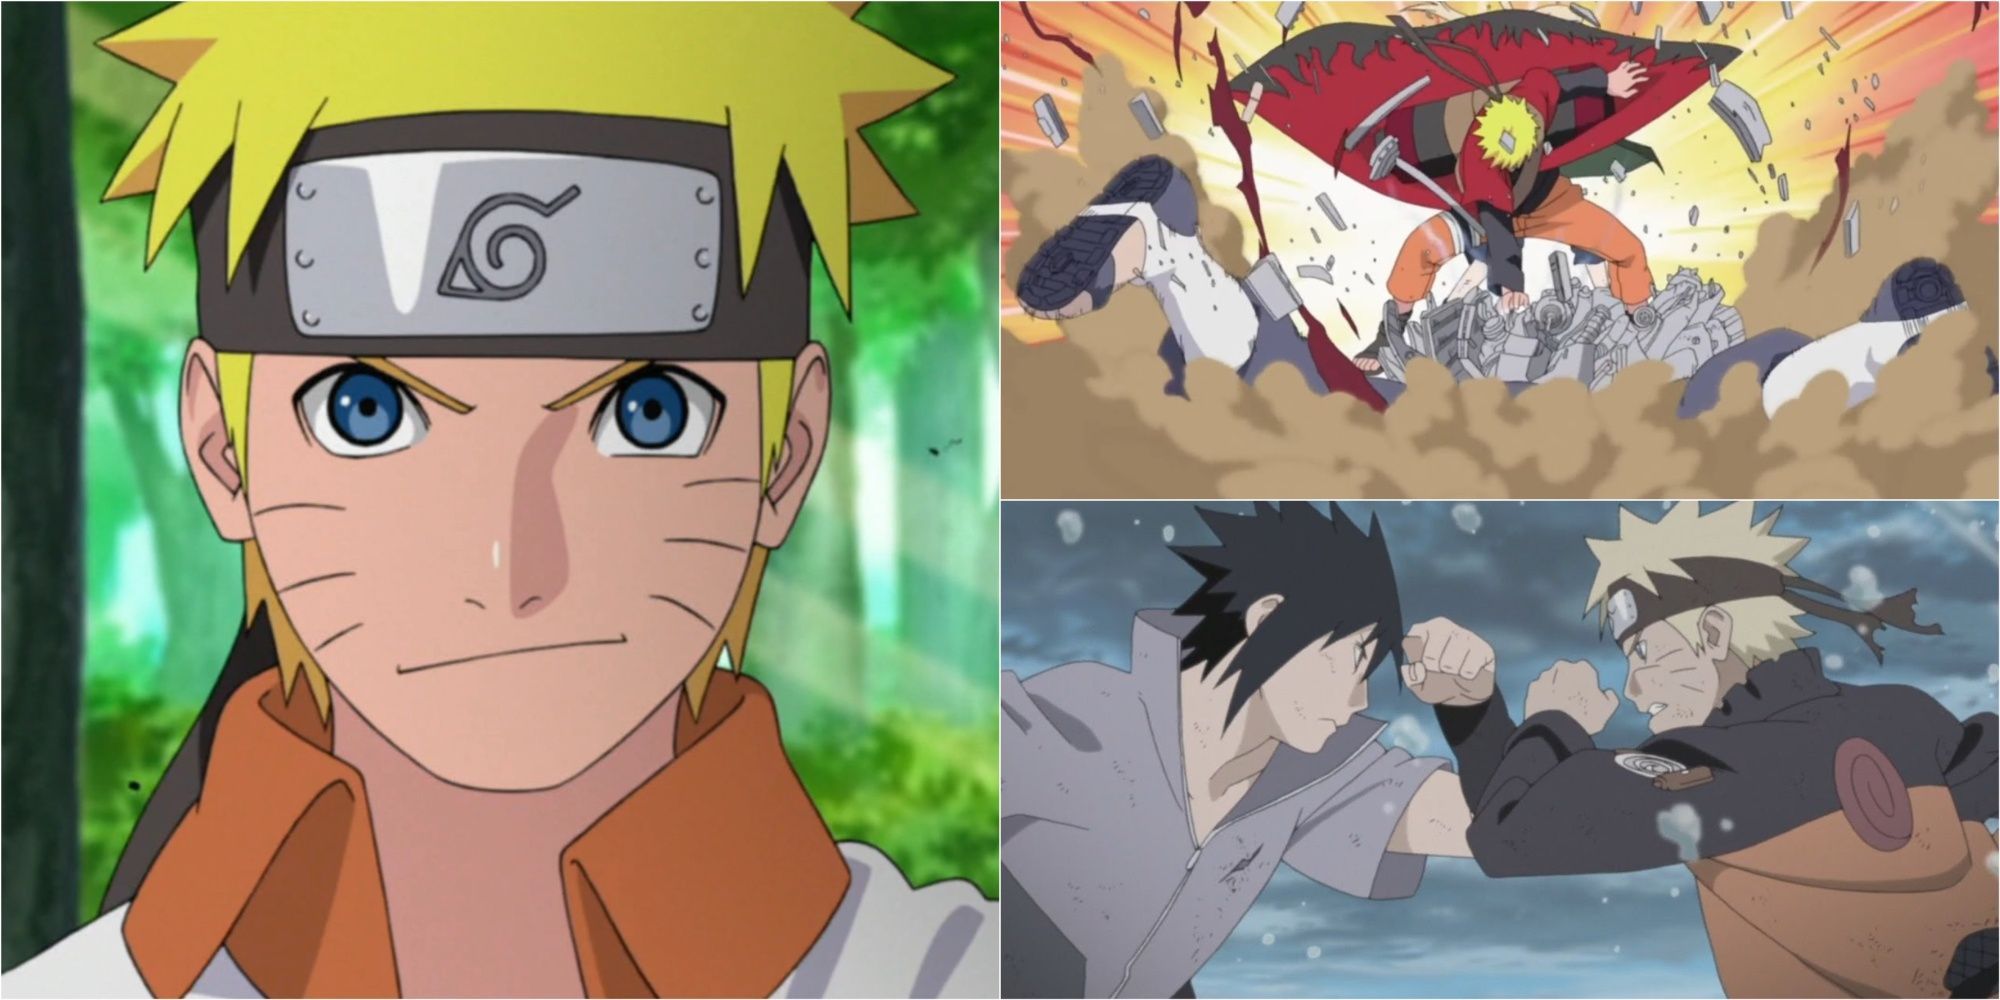 10 Things Naruto Does Better Than Most Other Action Shonen Anime featured image